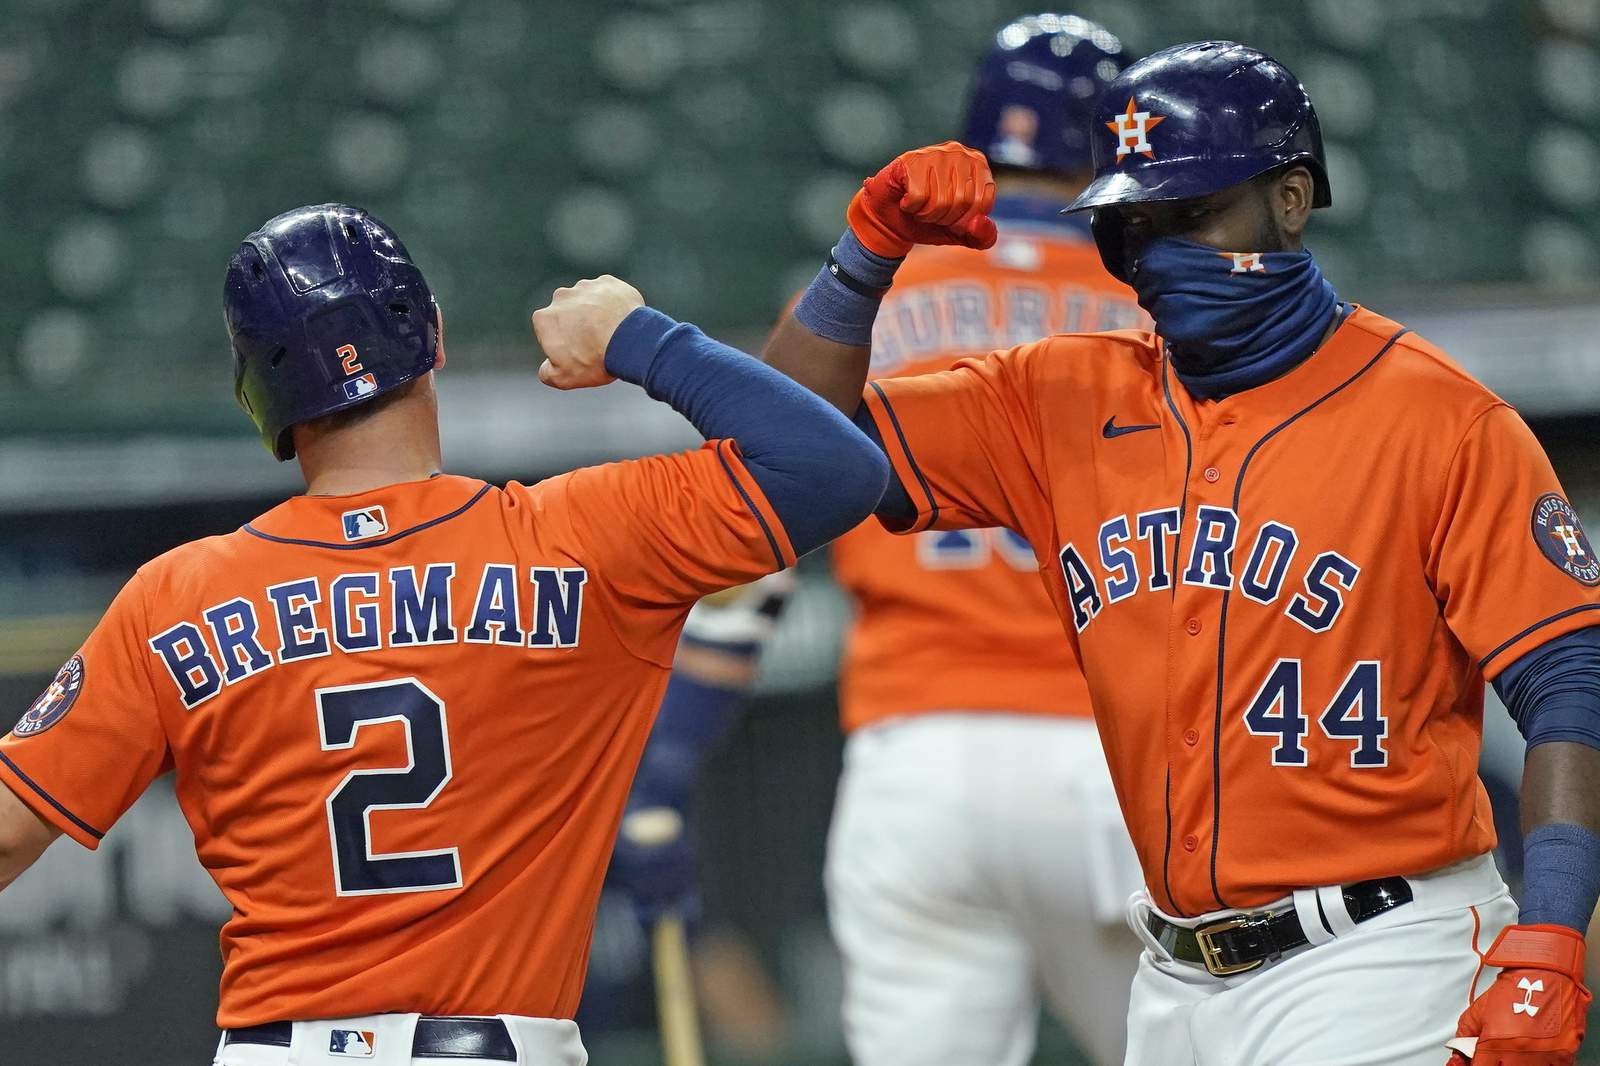 Astros to play double-header Tuesday ahead of potential impact of TS Laura later this week